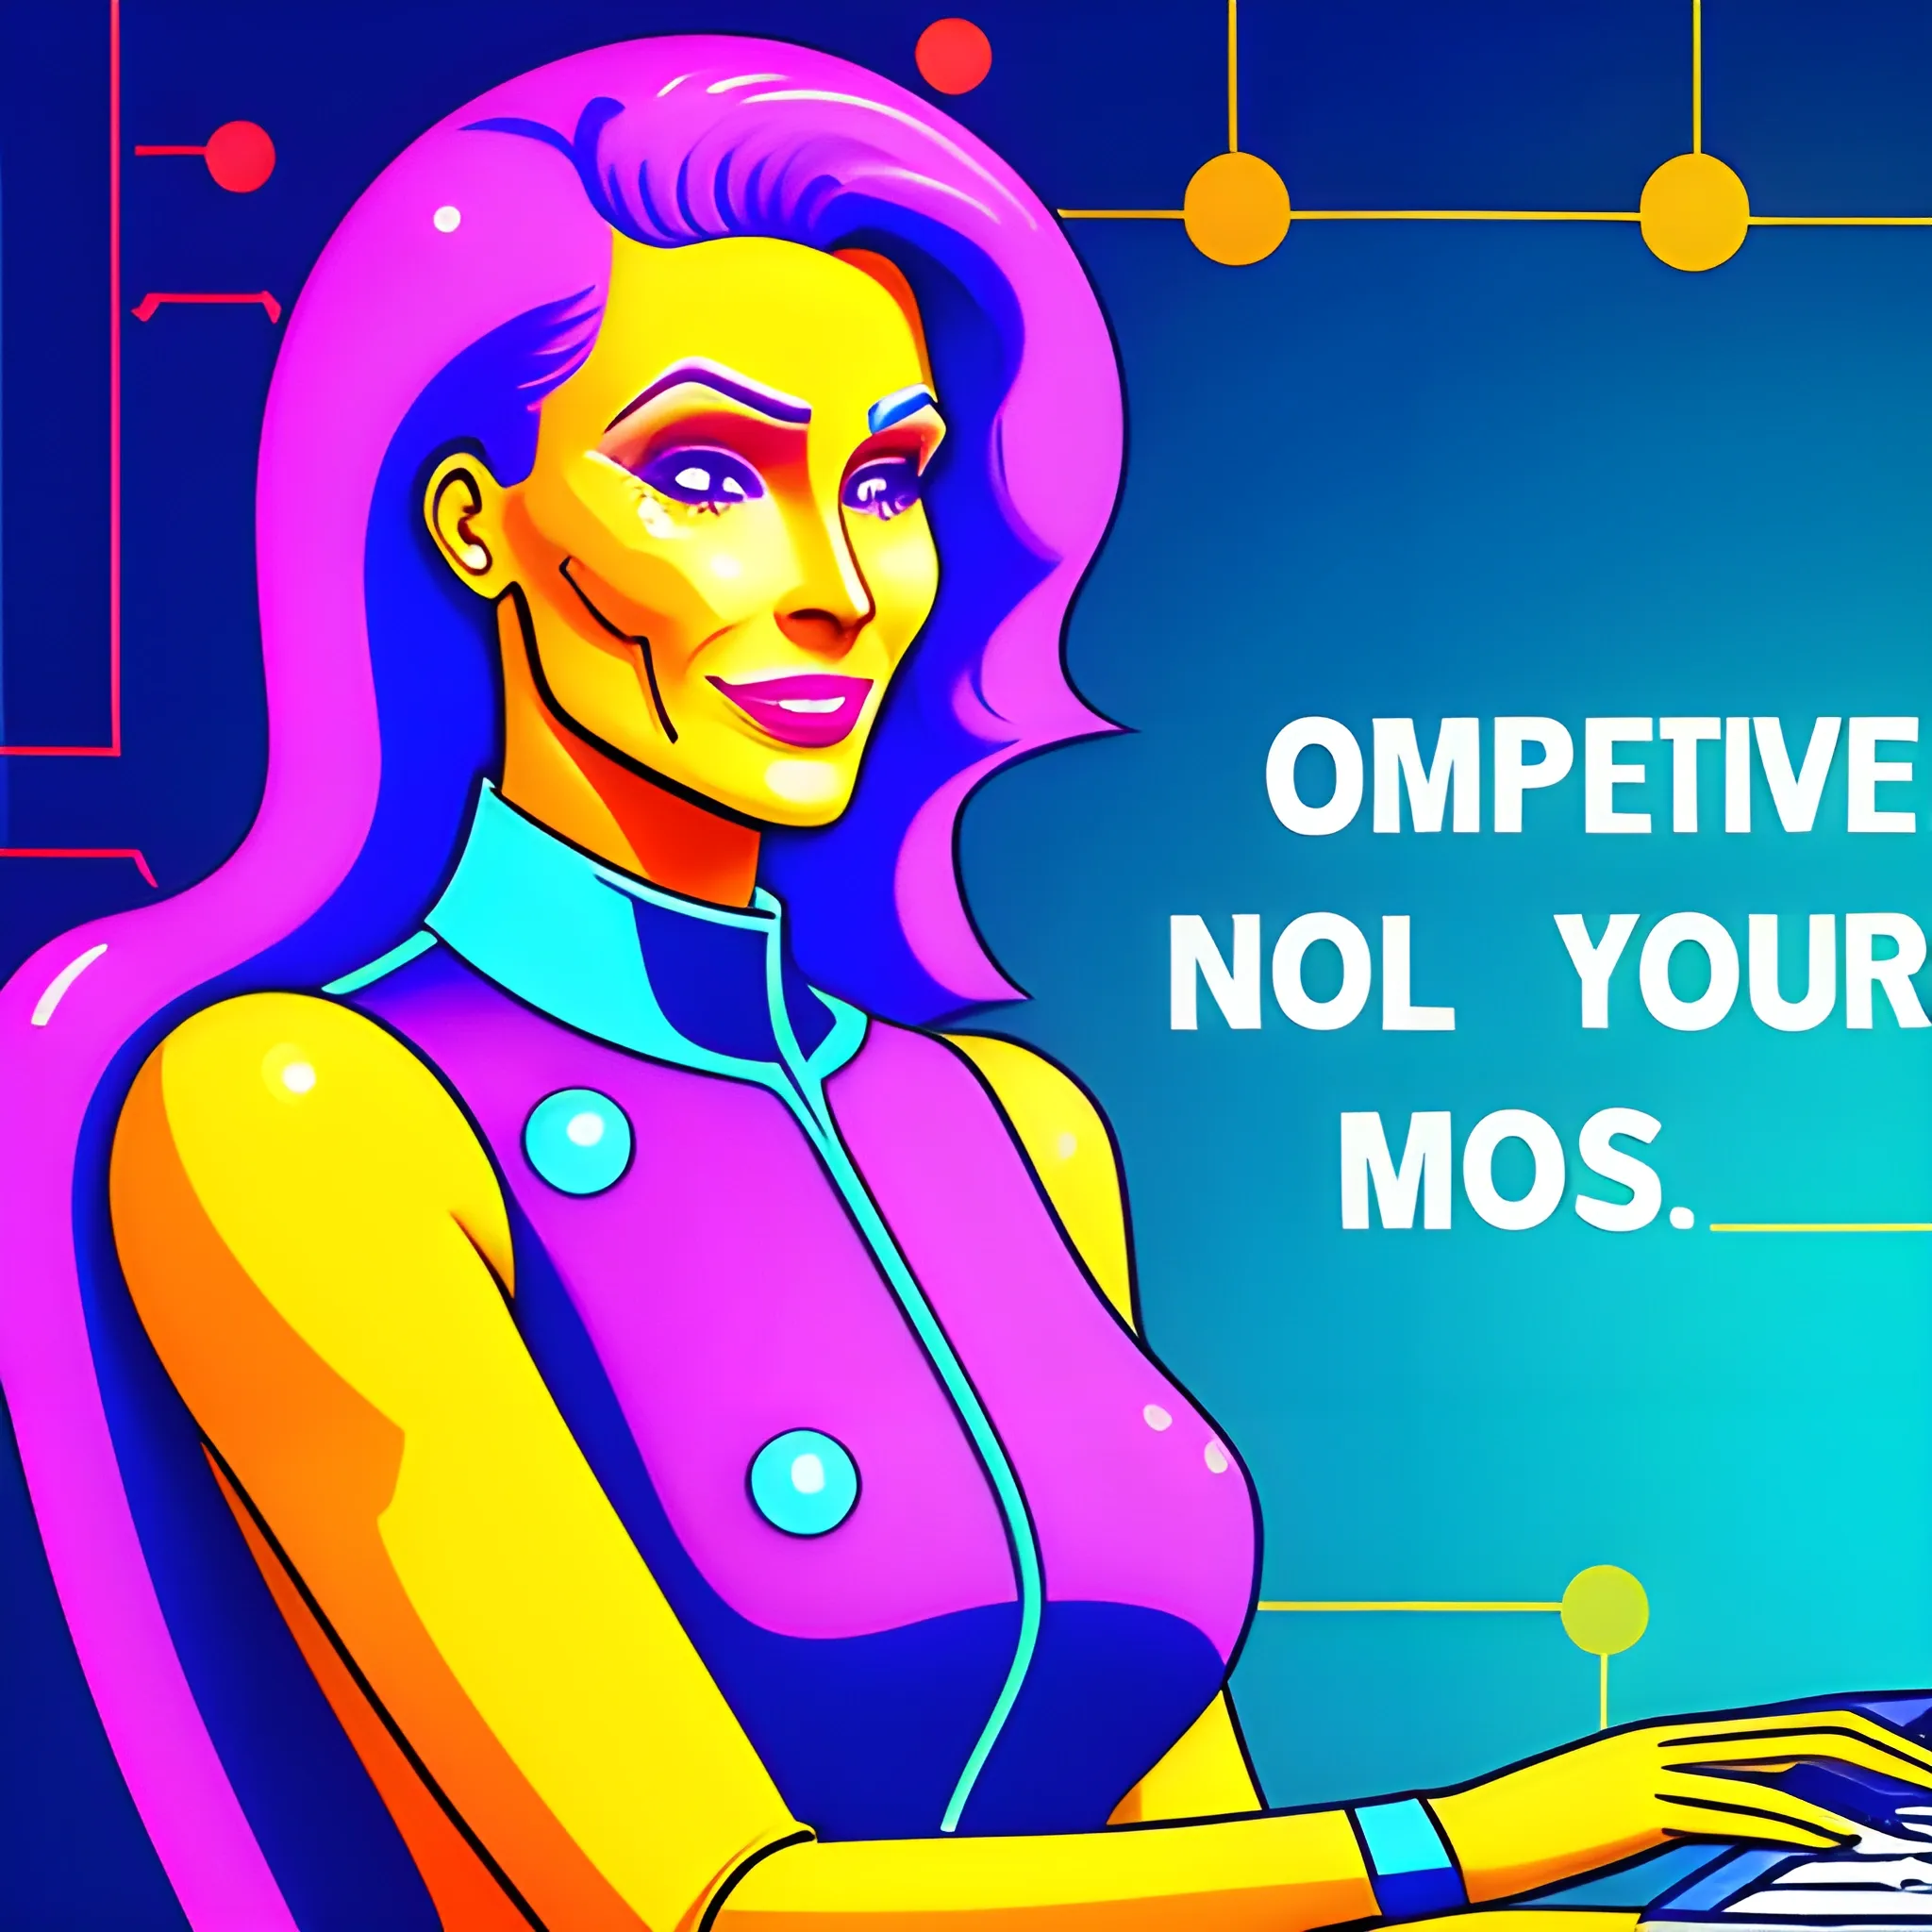 Generate a corporative, EMPATHY, EMOCIONAL HAPPY, future, colorful, modern image, related to digital products, do not use machines DO NOT USE TEXT , with this concept: “THE WOMAN TEACHER AND STUDENT OF the future”, 